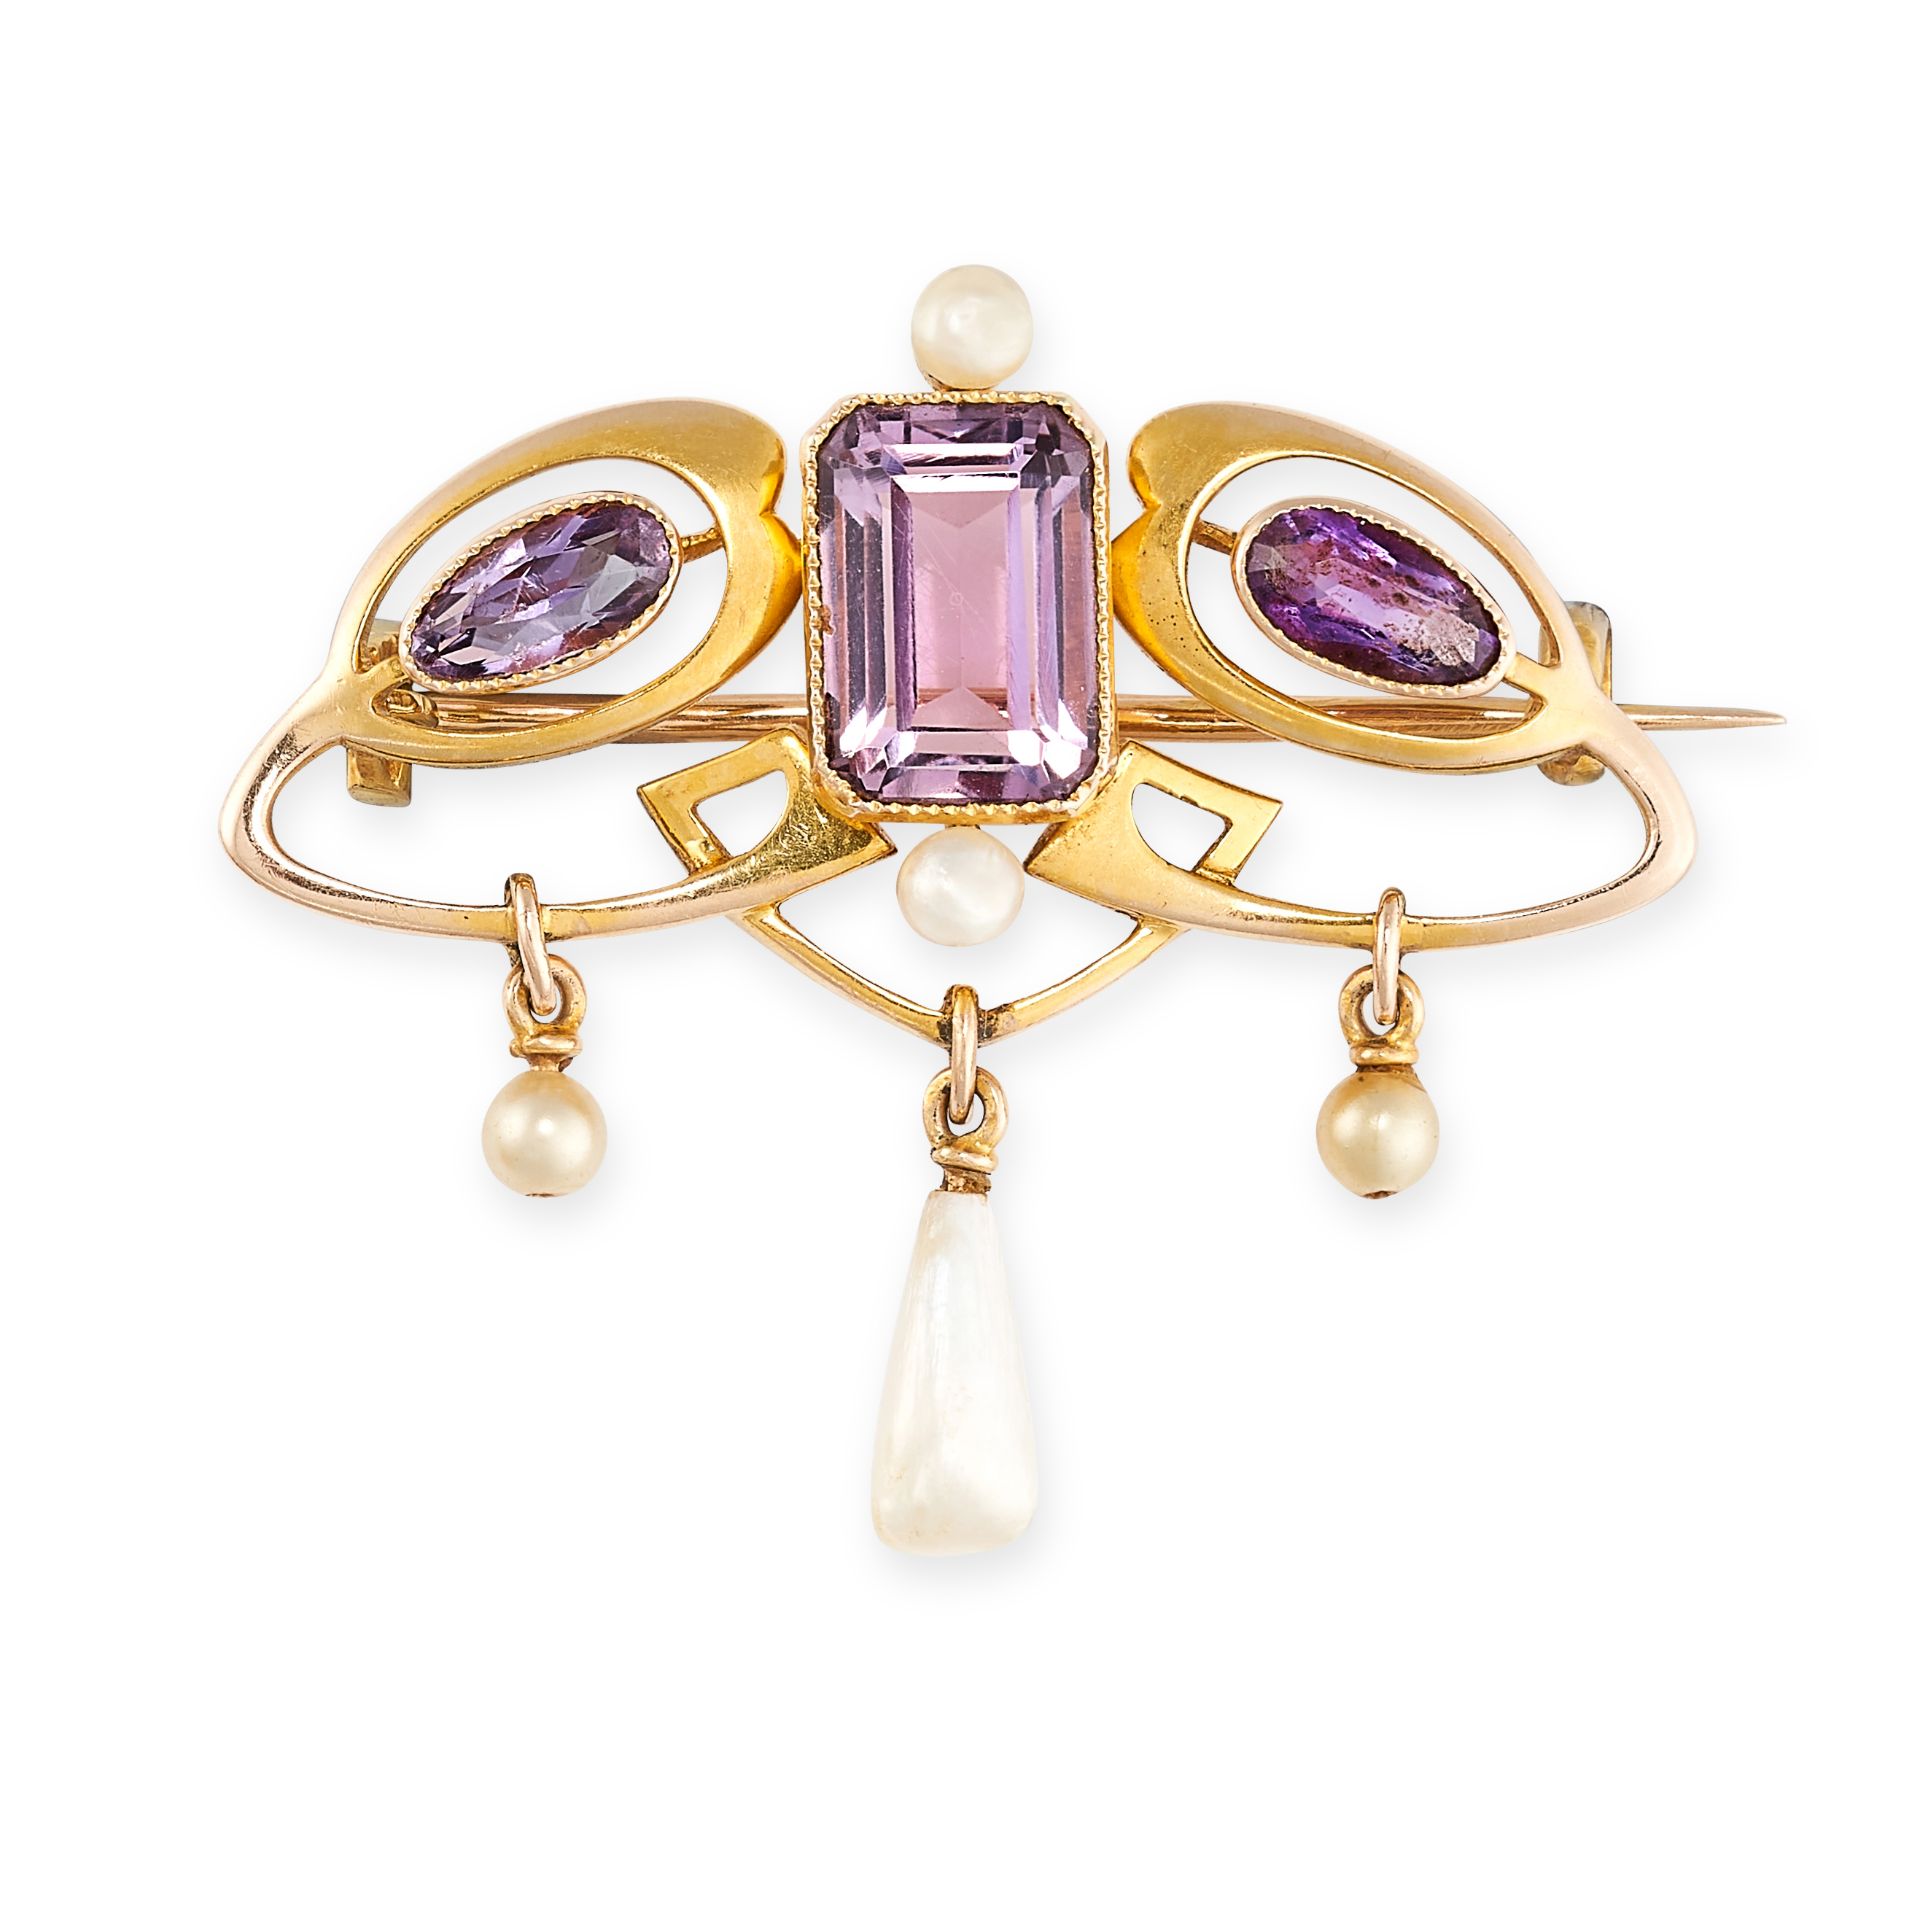 NO RESERVE - AN ART NOUVEAU AMETHYST AND PEARL BROOCH in 15ct yellow gold, set with emerald cut